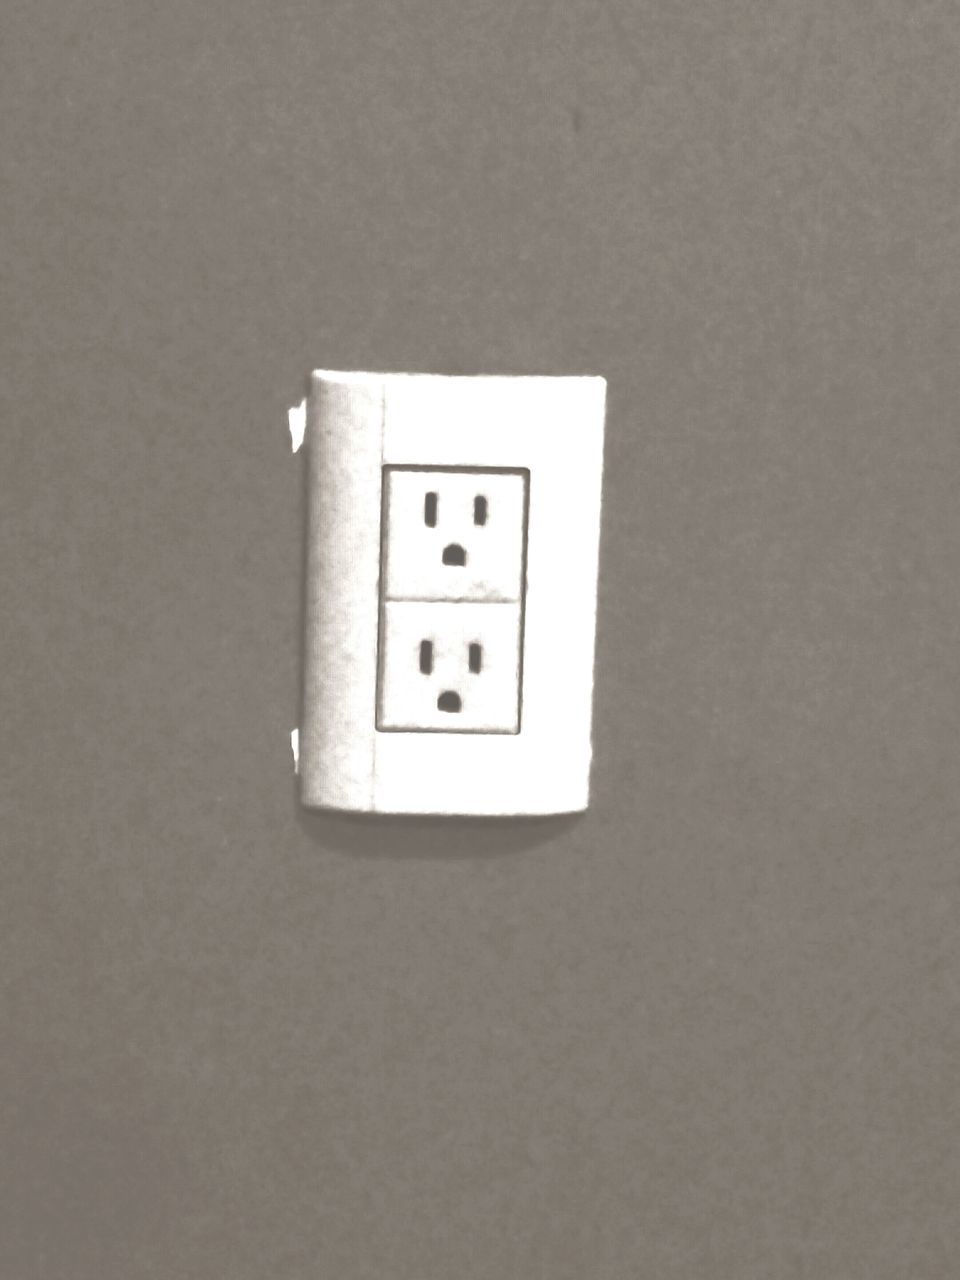 indoors, wall - building feature, copy space, single object, still life, wall, close-up, studio shot, technology, electricity, no people, connection, communication, table, home interior, simplicity, man made object, geometric shape, white color, metal